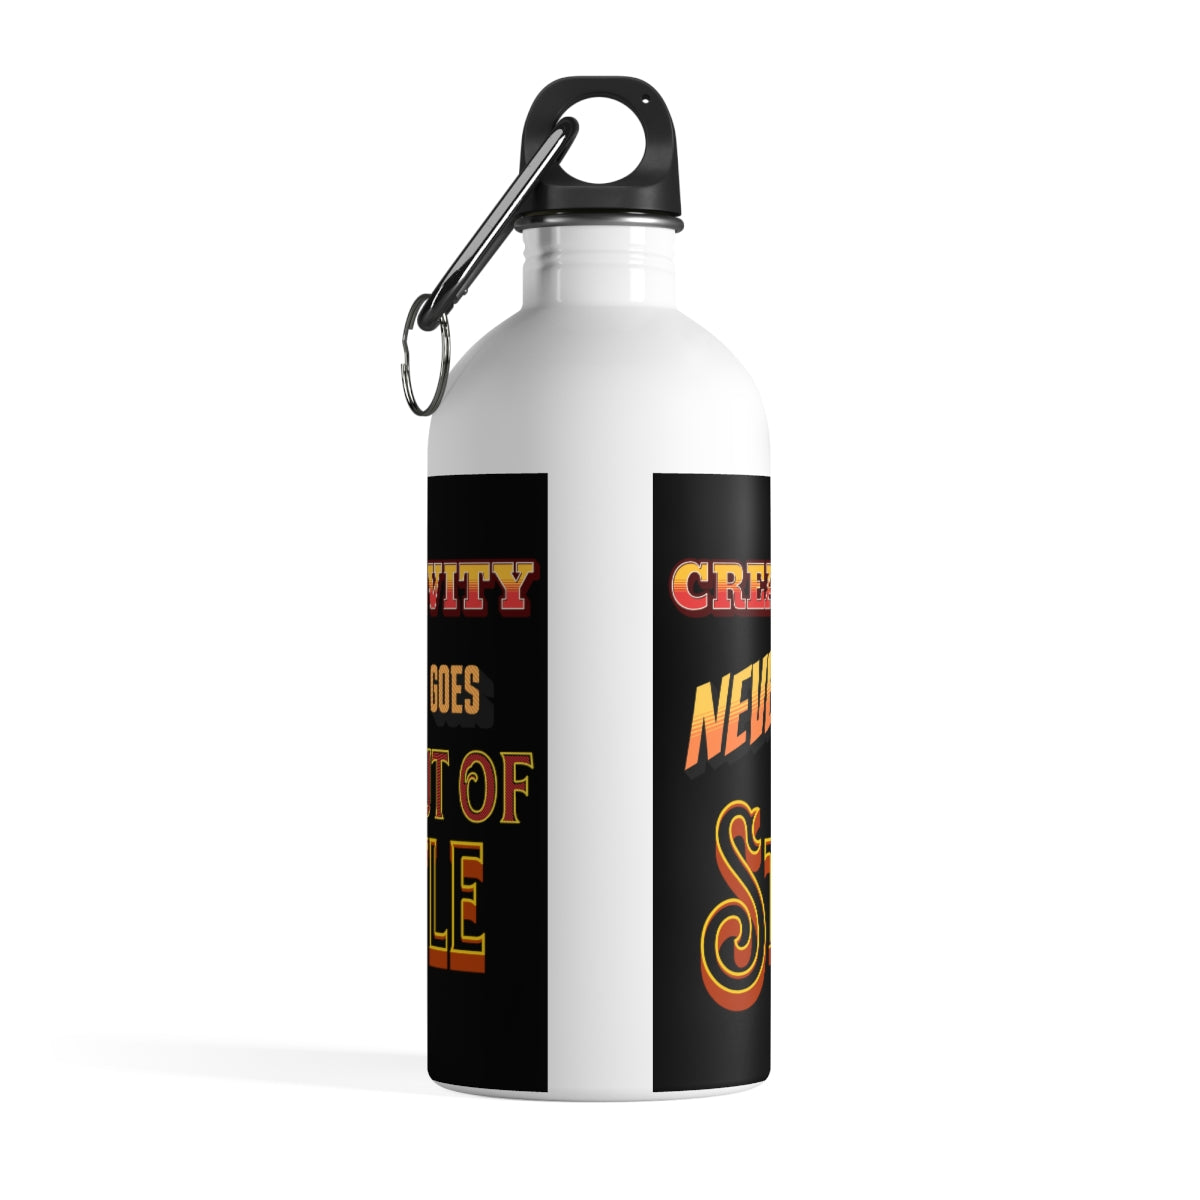 Creativity Never Goes Out of Style - Stainless Steel Water Bottle